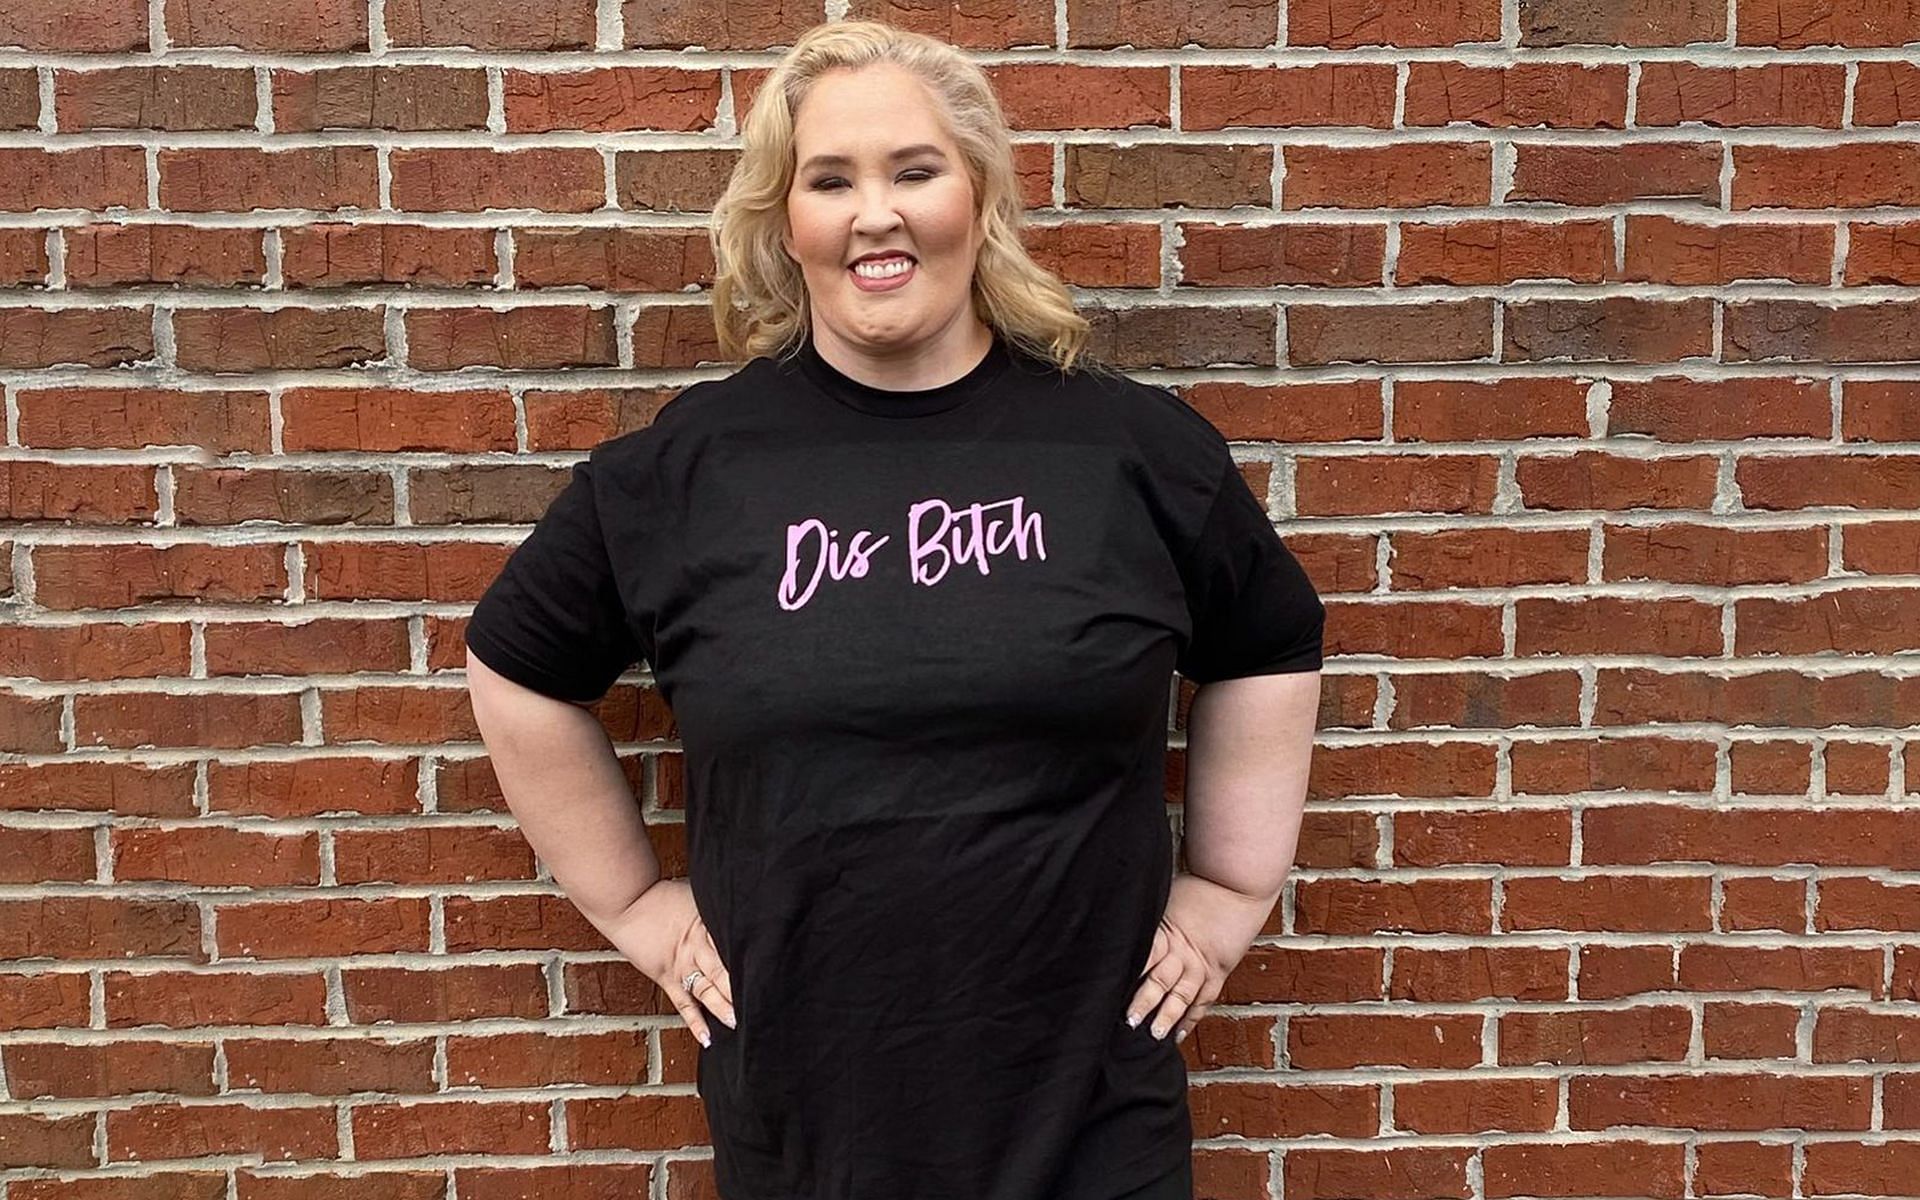 June Shannon from Mama June: Road to Redemption (Image via Instagram/mamajune)